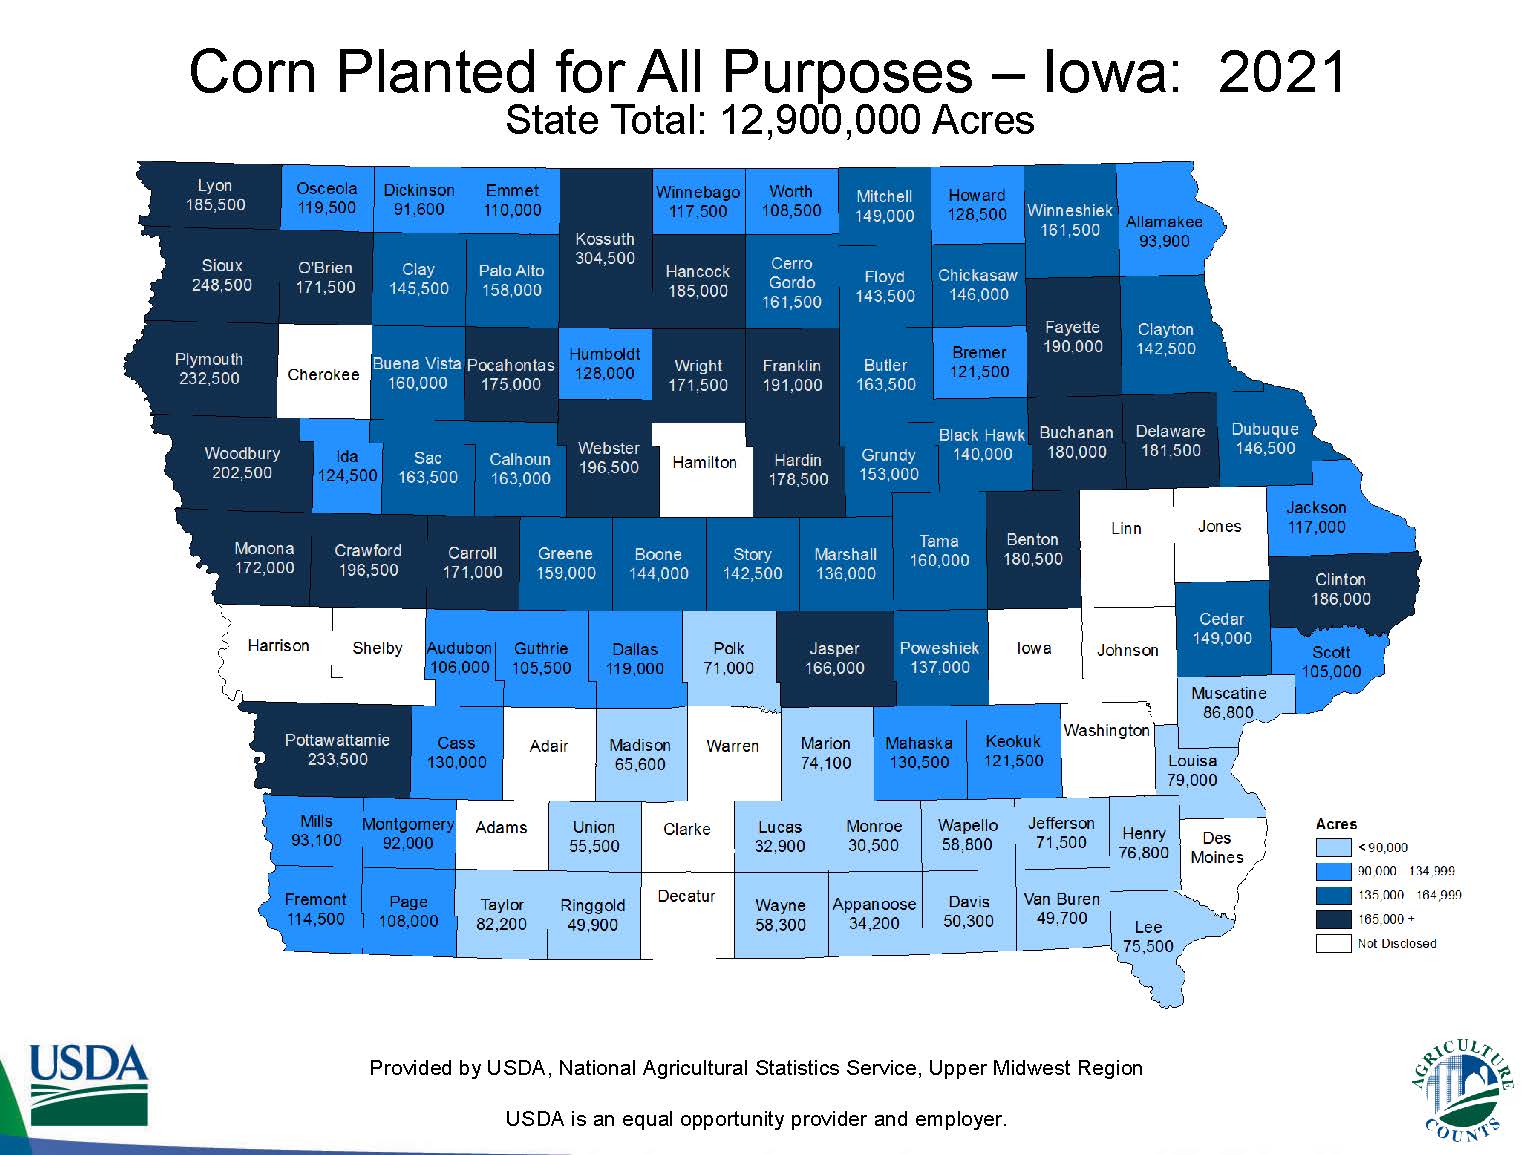 Map of corn plantings in Iowa; counties with higher acreage in increasingly darker shades of blue. Many counties plant over 100,000 acres, with some counties along the western border of the state planting 200,000 or more.